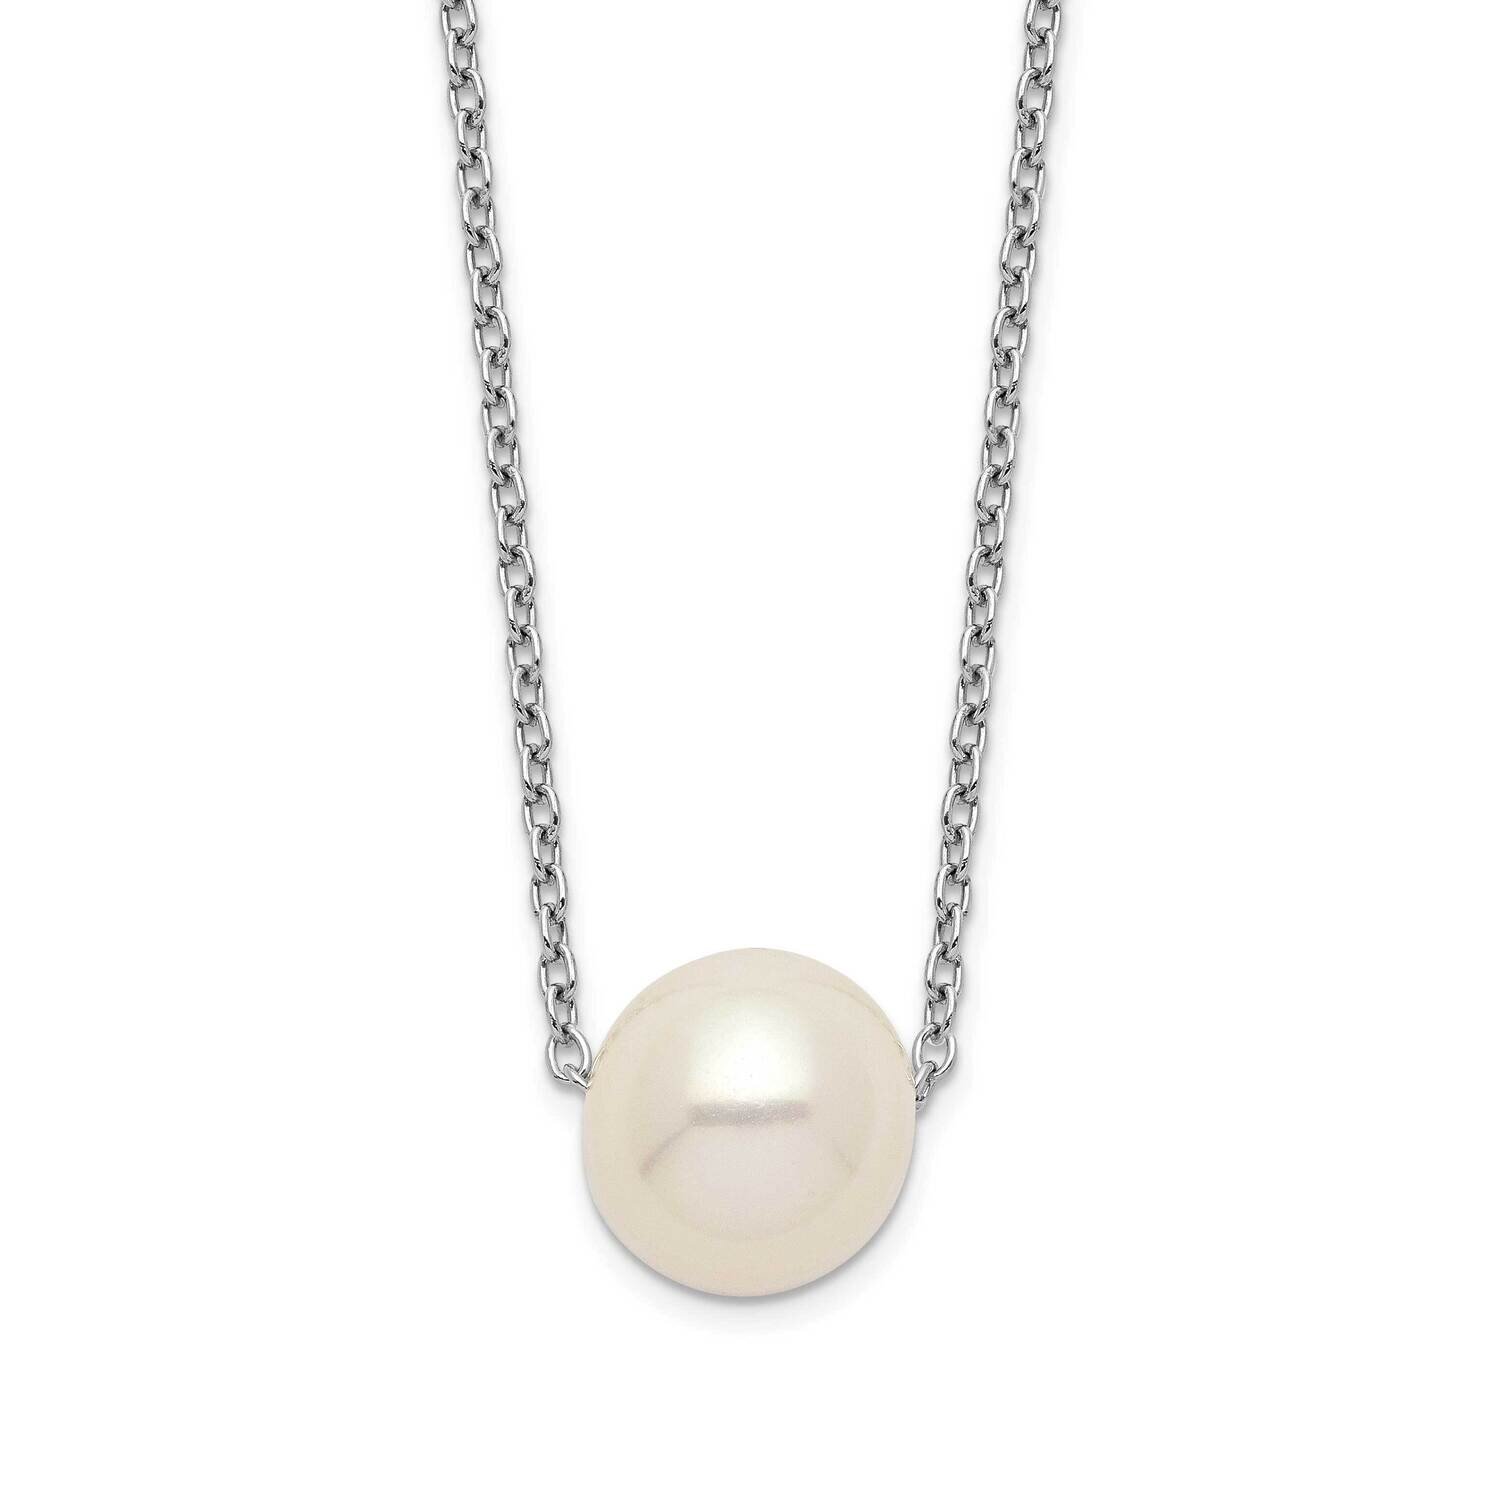 9-10mm White Rice Fwc Pearl Necklace Sterling Silver Rhodium-plated QH5532-18